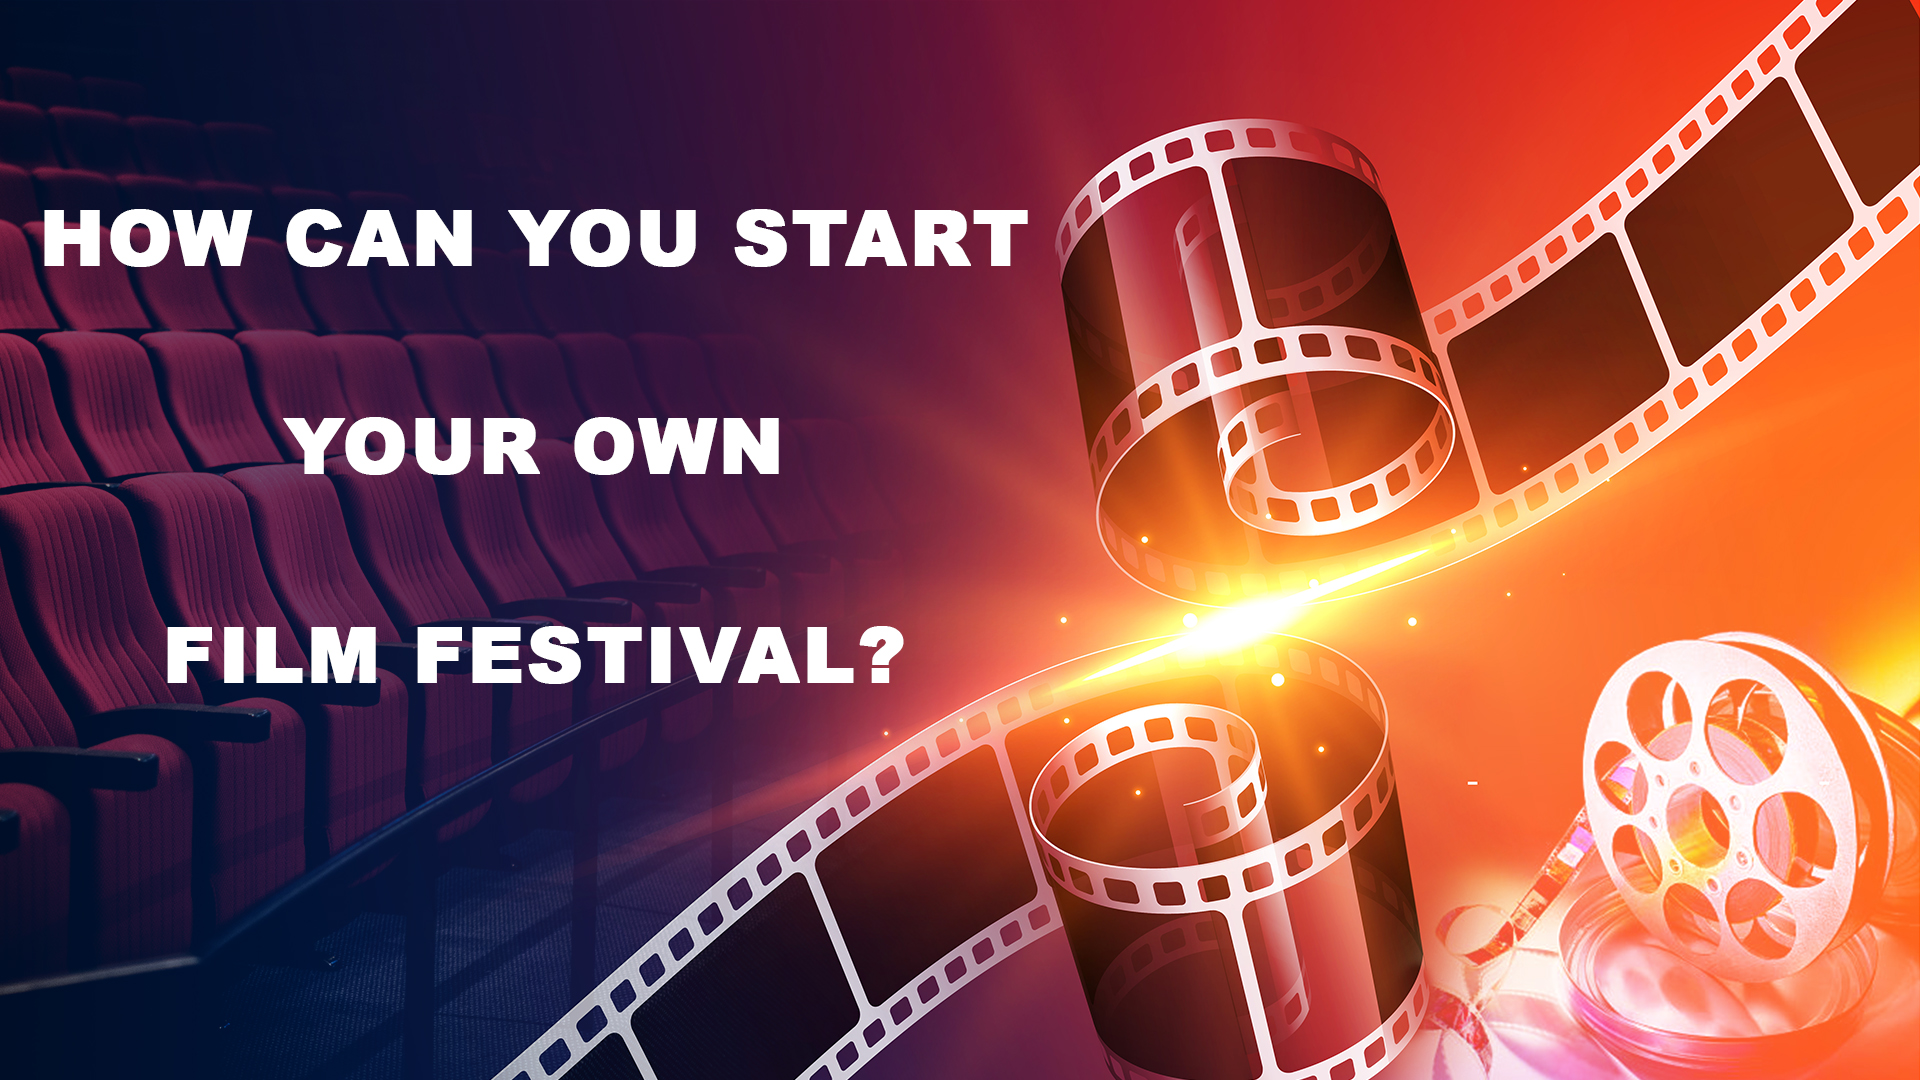 How can you start your own Film Festival?